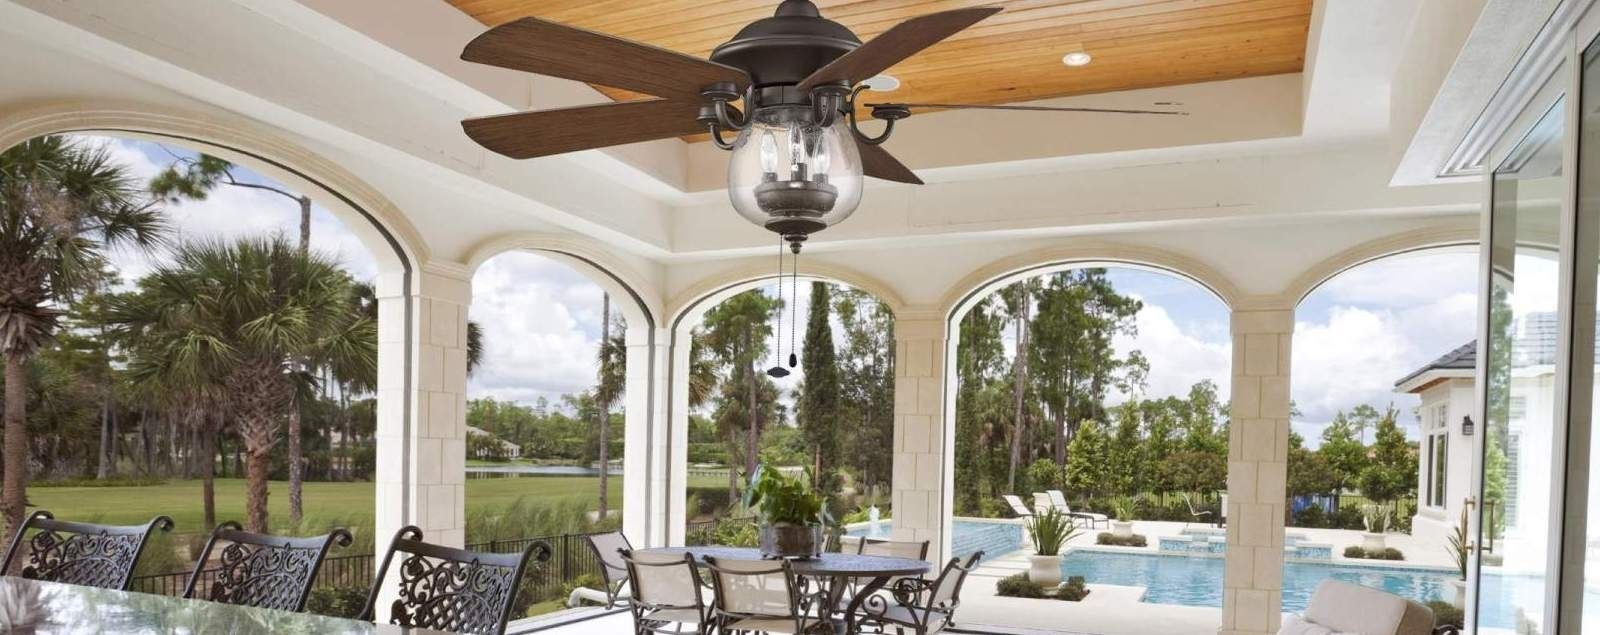 Featured Photo of Waterproof Outdoor Ceiling Fans